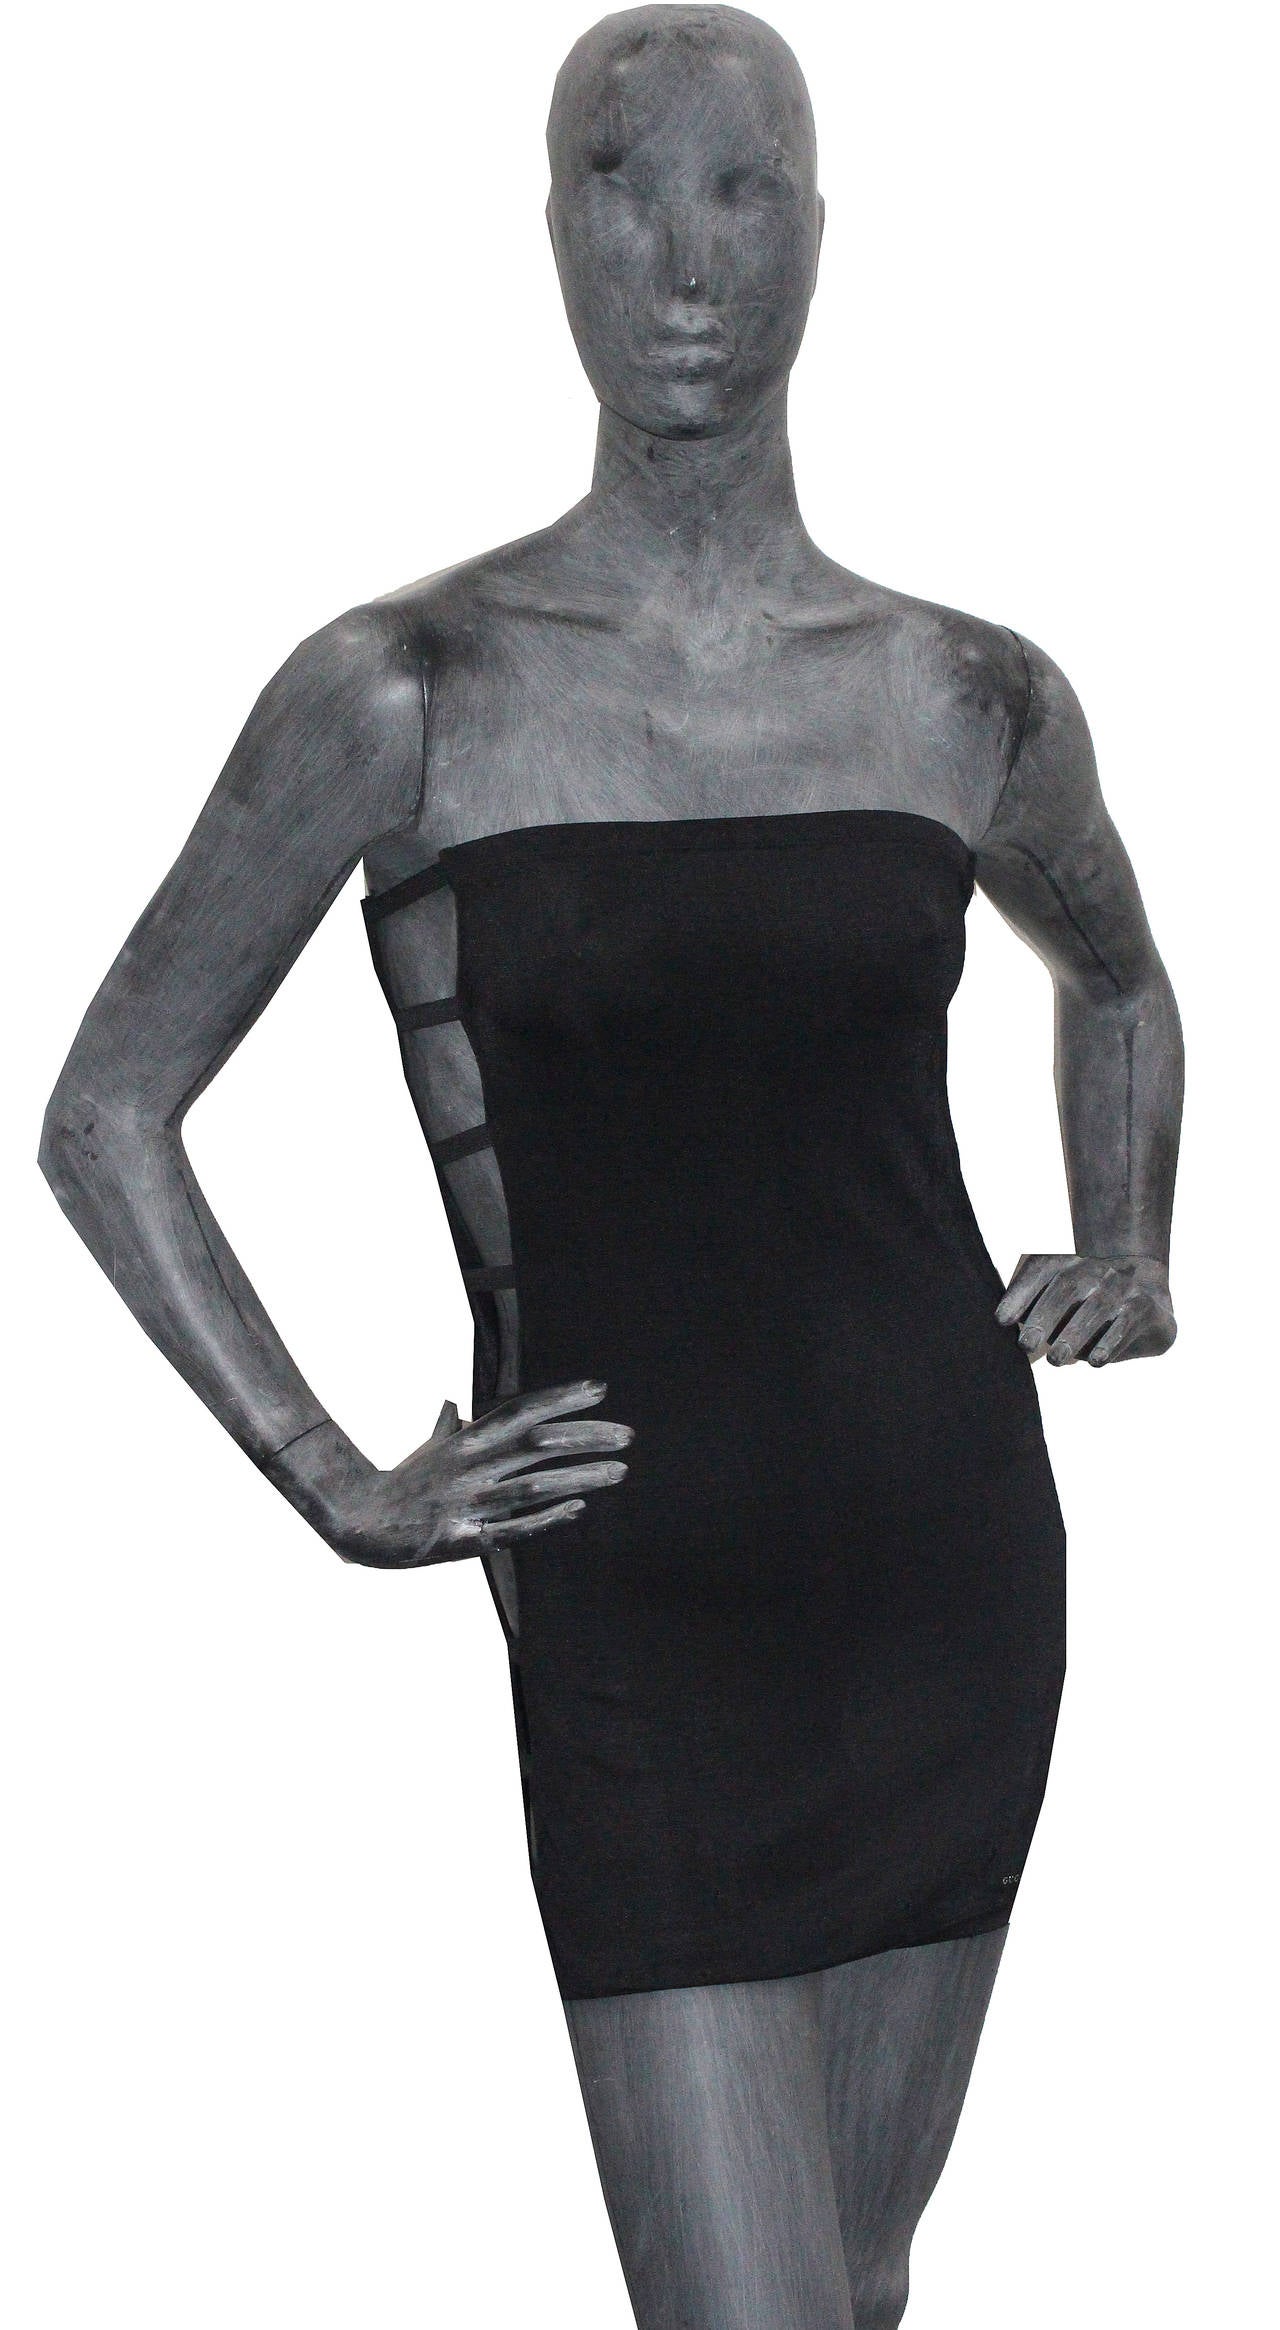 A mini dress by Gucci for Tom Ford made in 1999 for the Spring/Summer 2000 collection. The dress is in a black viscose with spandex and has bondage straps on either sides showing the skin of the wearer. 

Size - Medium